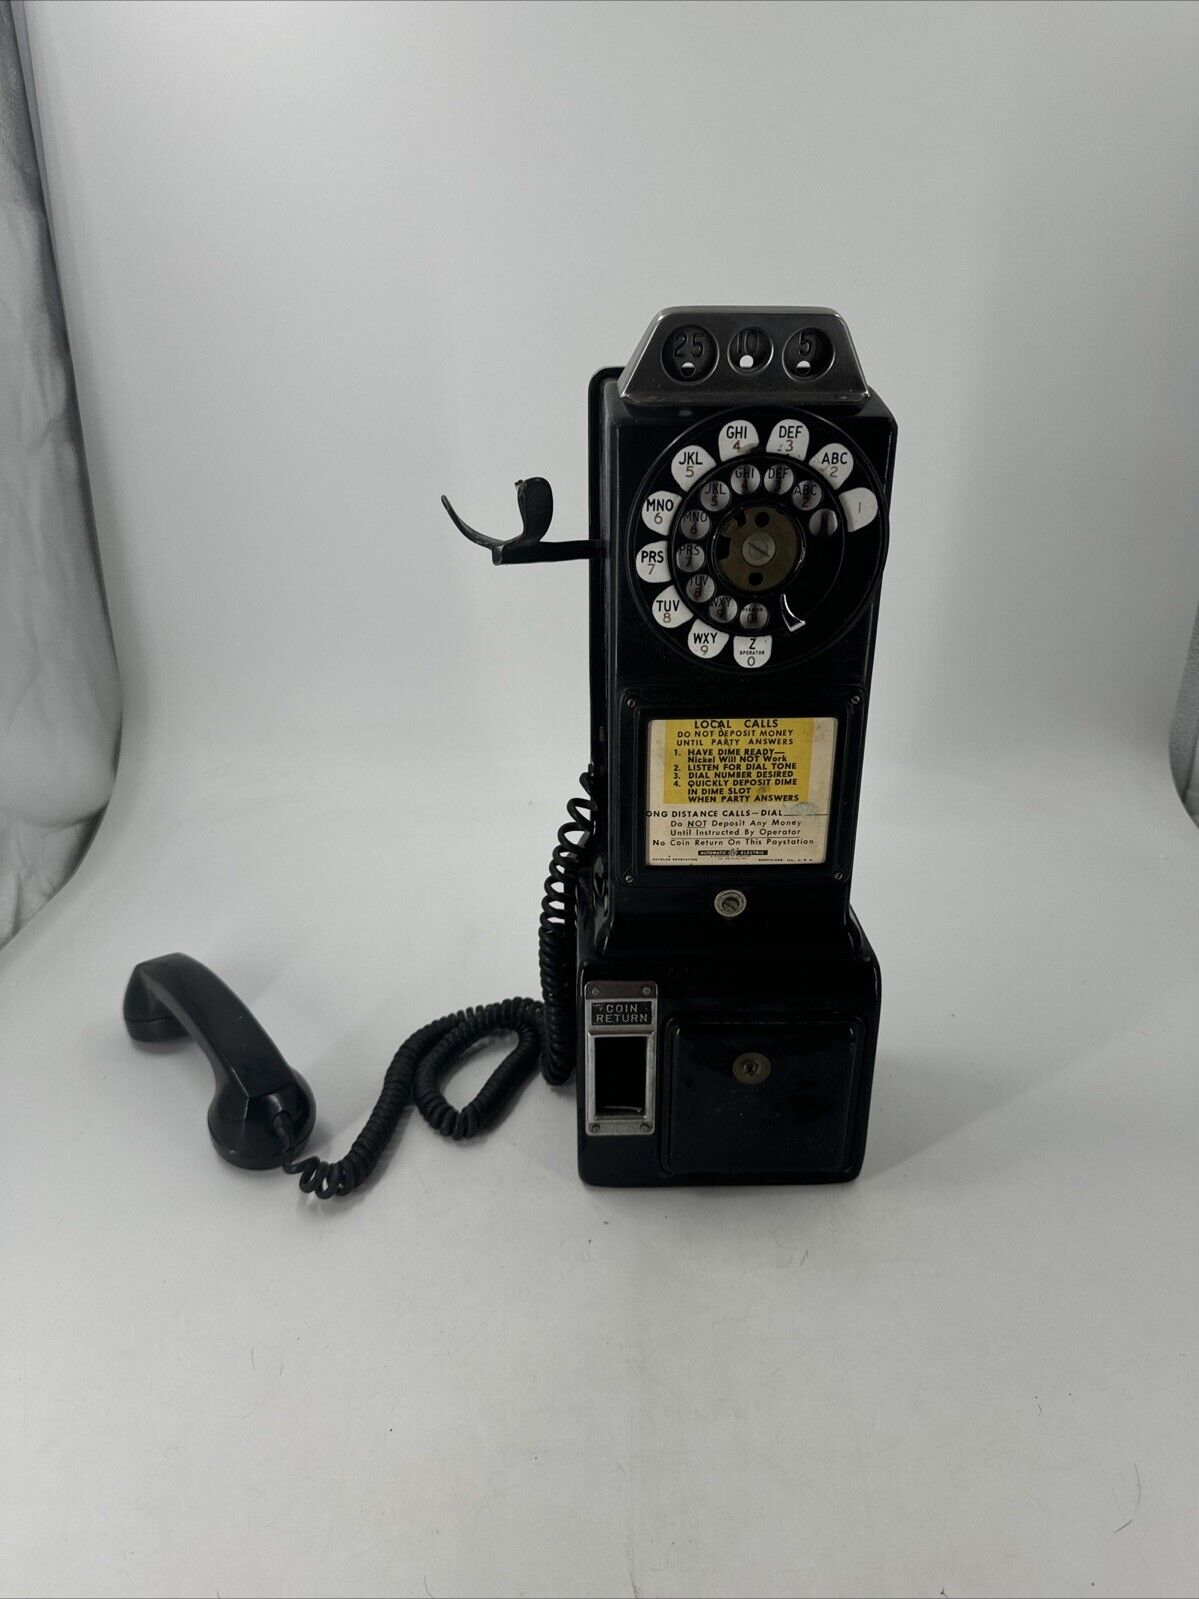 Automatic Electric Company Pay Telephone 3 Coin Slot AS IS PARTS NO KEYS